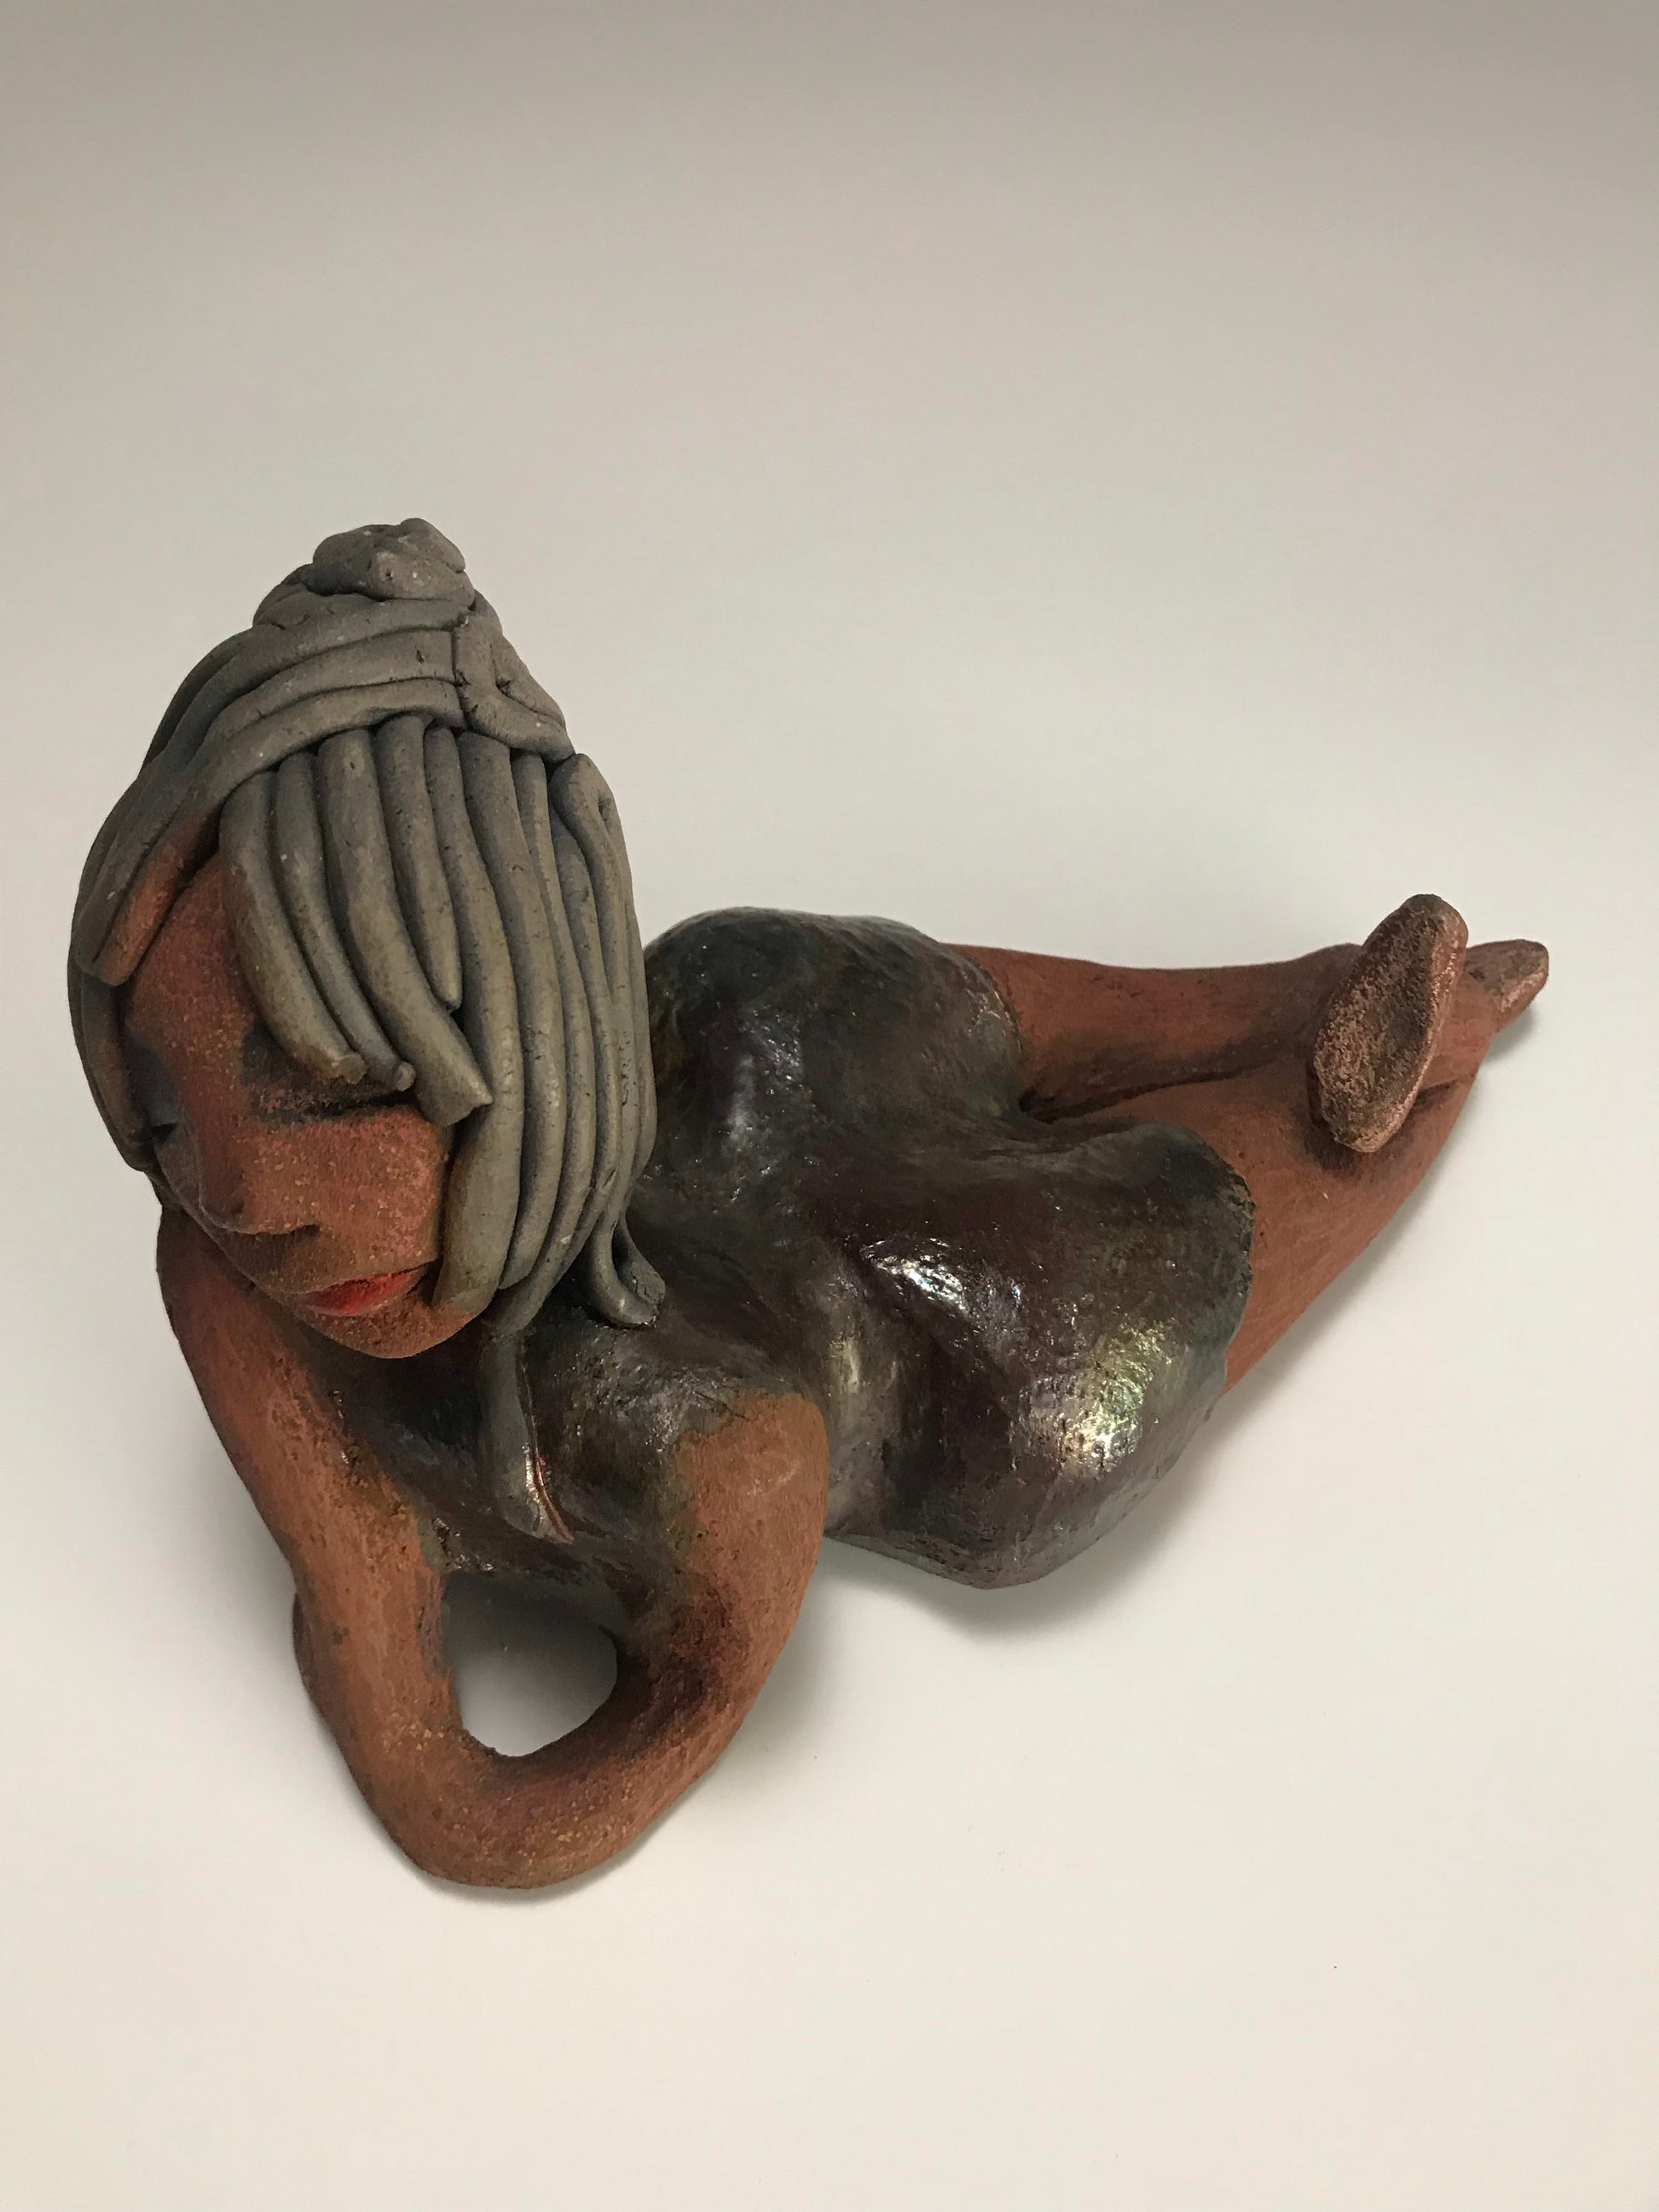      Savannah is 6 "x 4" x 9" and weighs 2.3 lbs.     She has smoky grey hair that's etched in clay.     Savannah has a dark metallic copper dress with hints of alligator green.     Savannah has a lovely copper brown complexion.     Her look says it all     What are you waiting for?  Free Shipping!